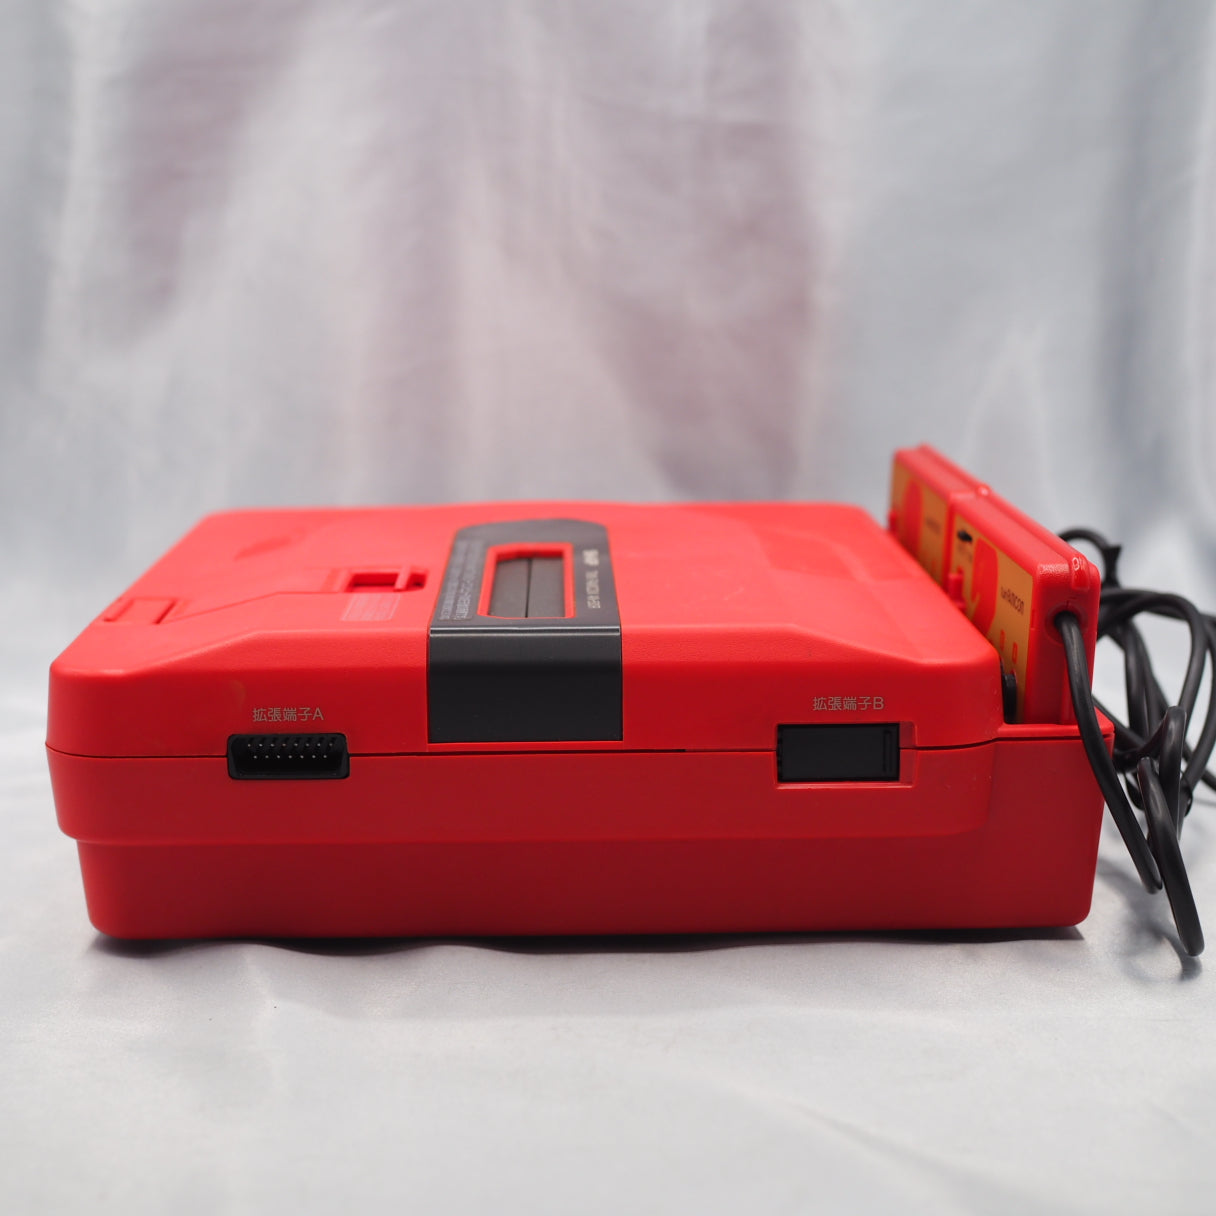 Twin Famicom AN-500R [New Rubber Belt replaced]